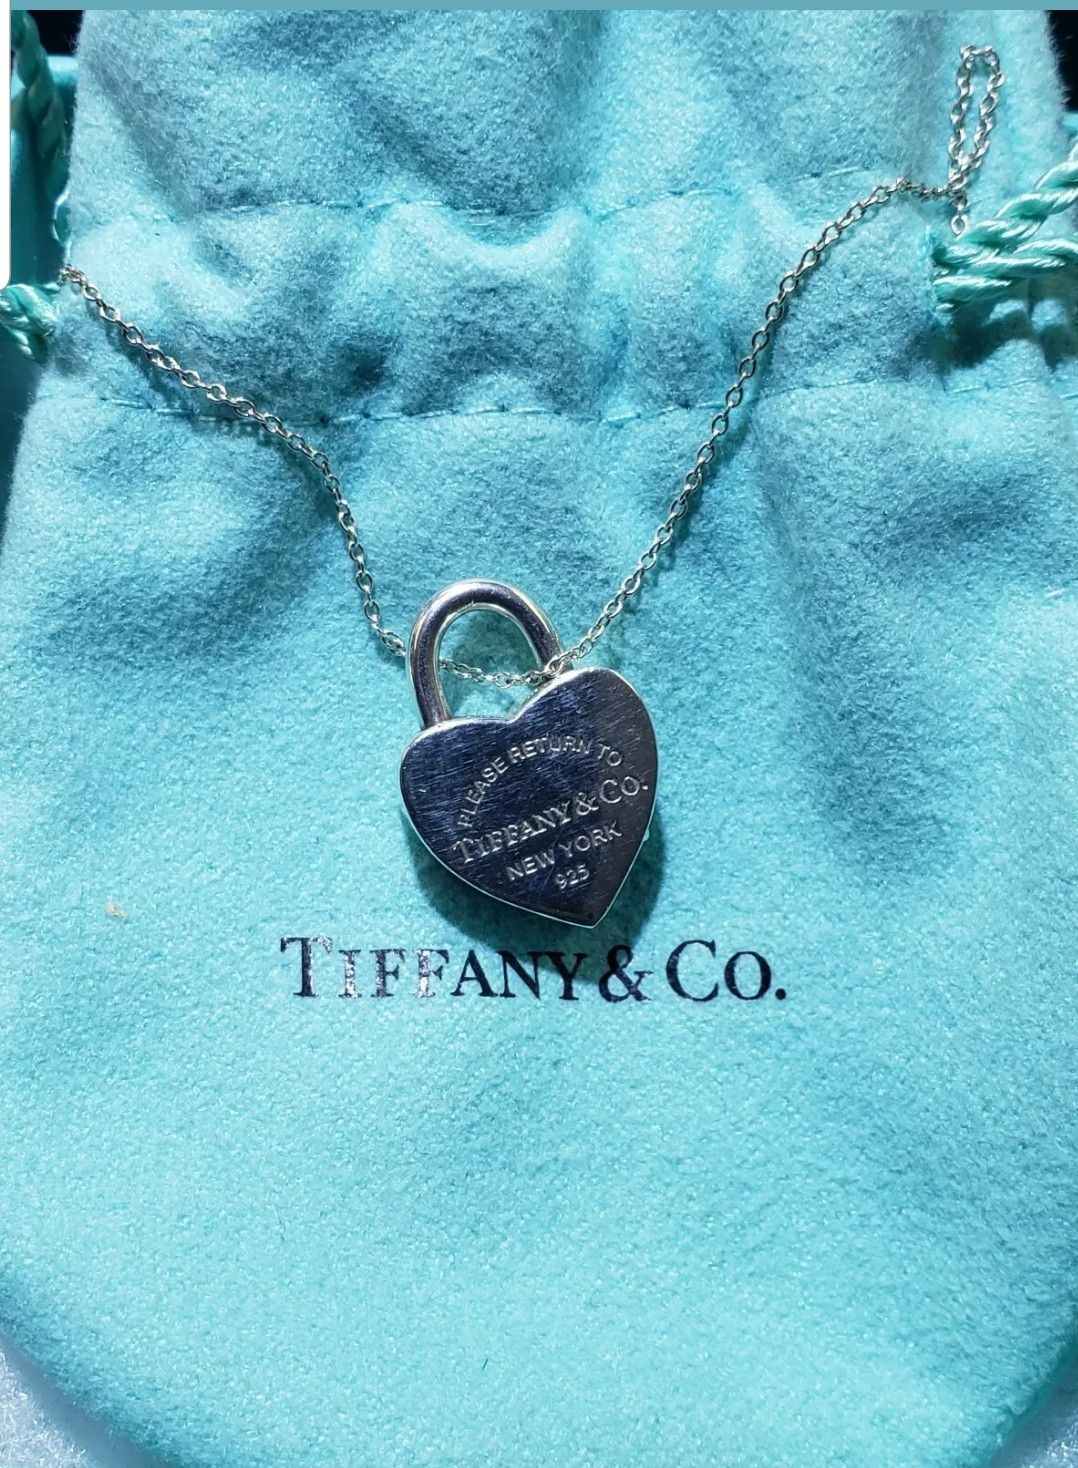 Tiffany & Co padlock heart charm with necklace Sterling silver